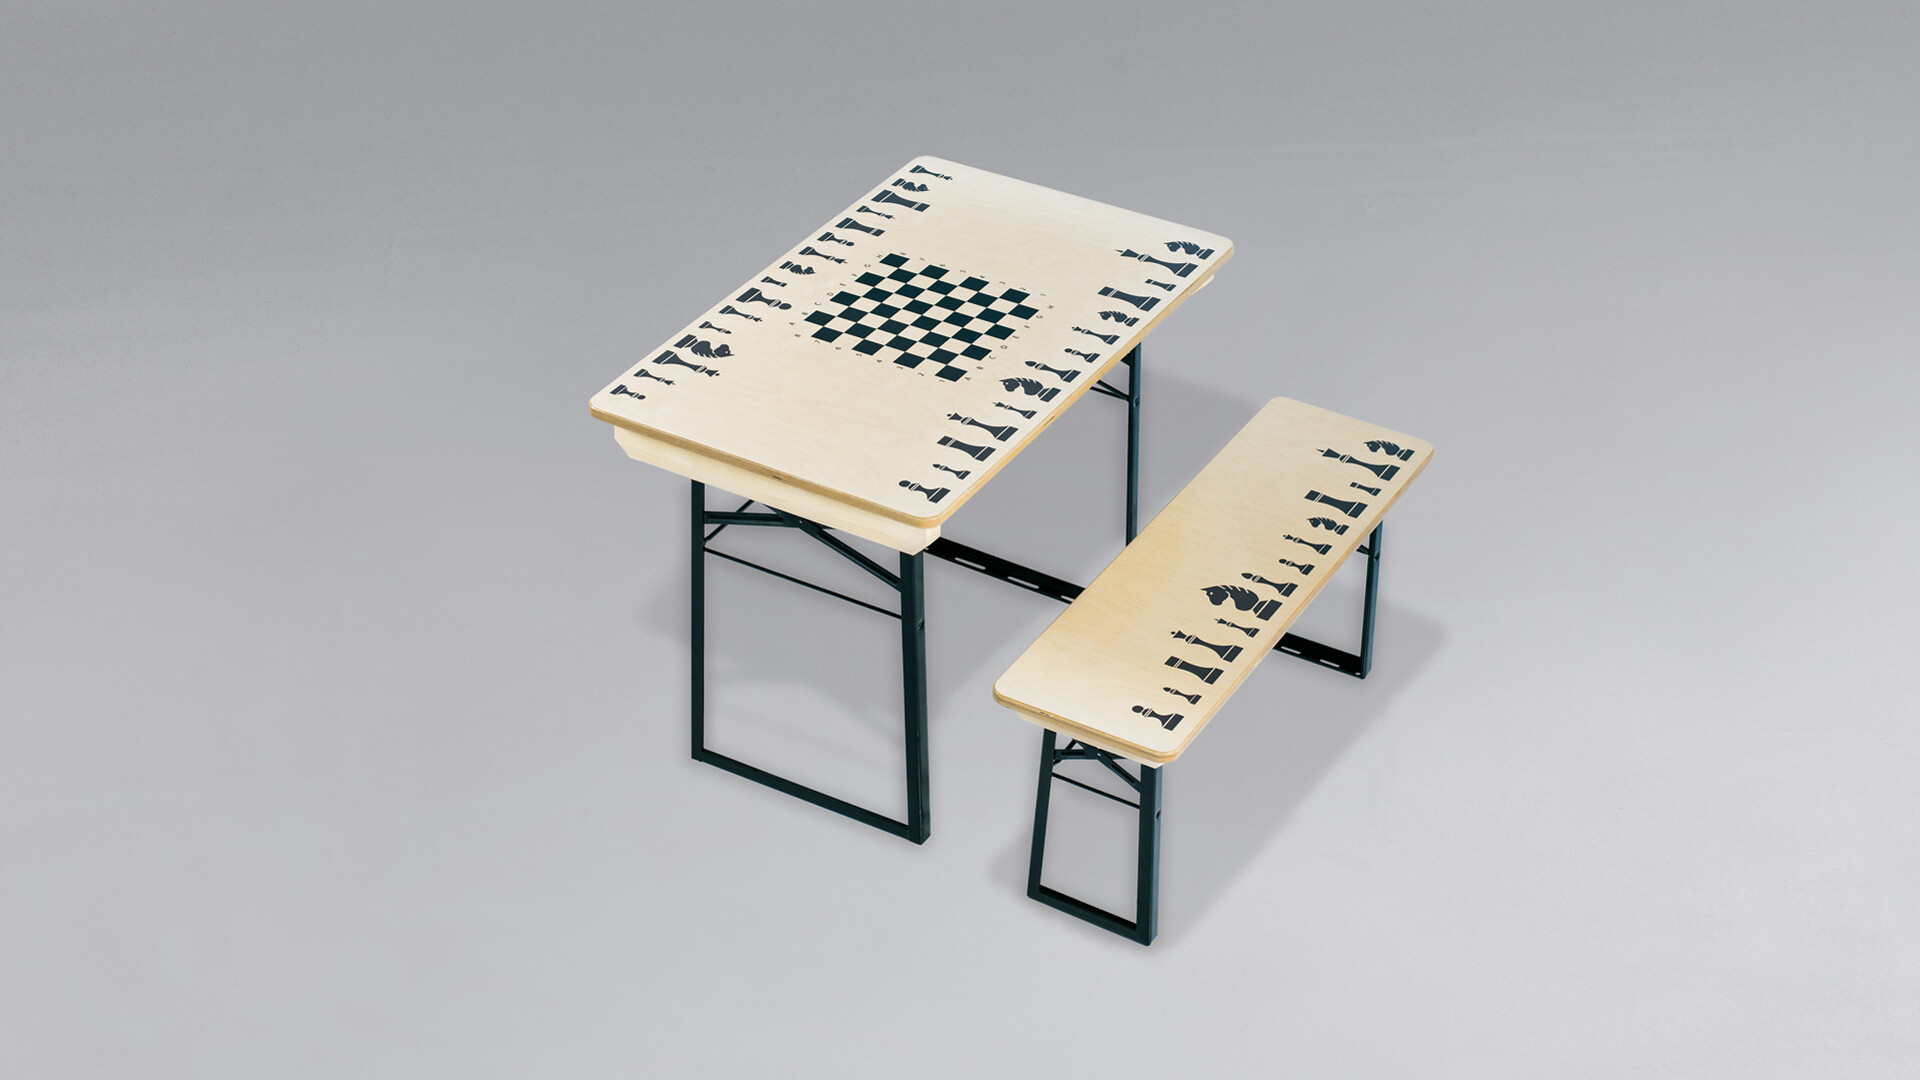 A chessboard was printed on a small beer garden table set by means of digital printing.